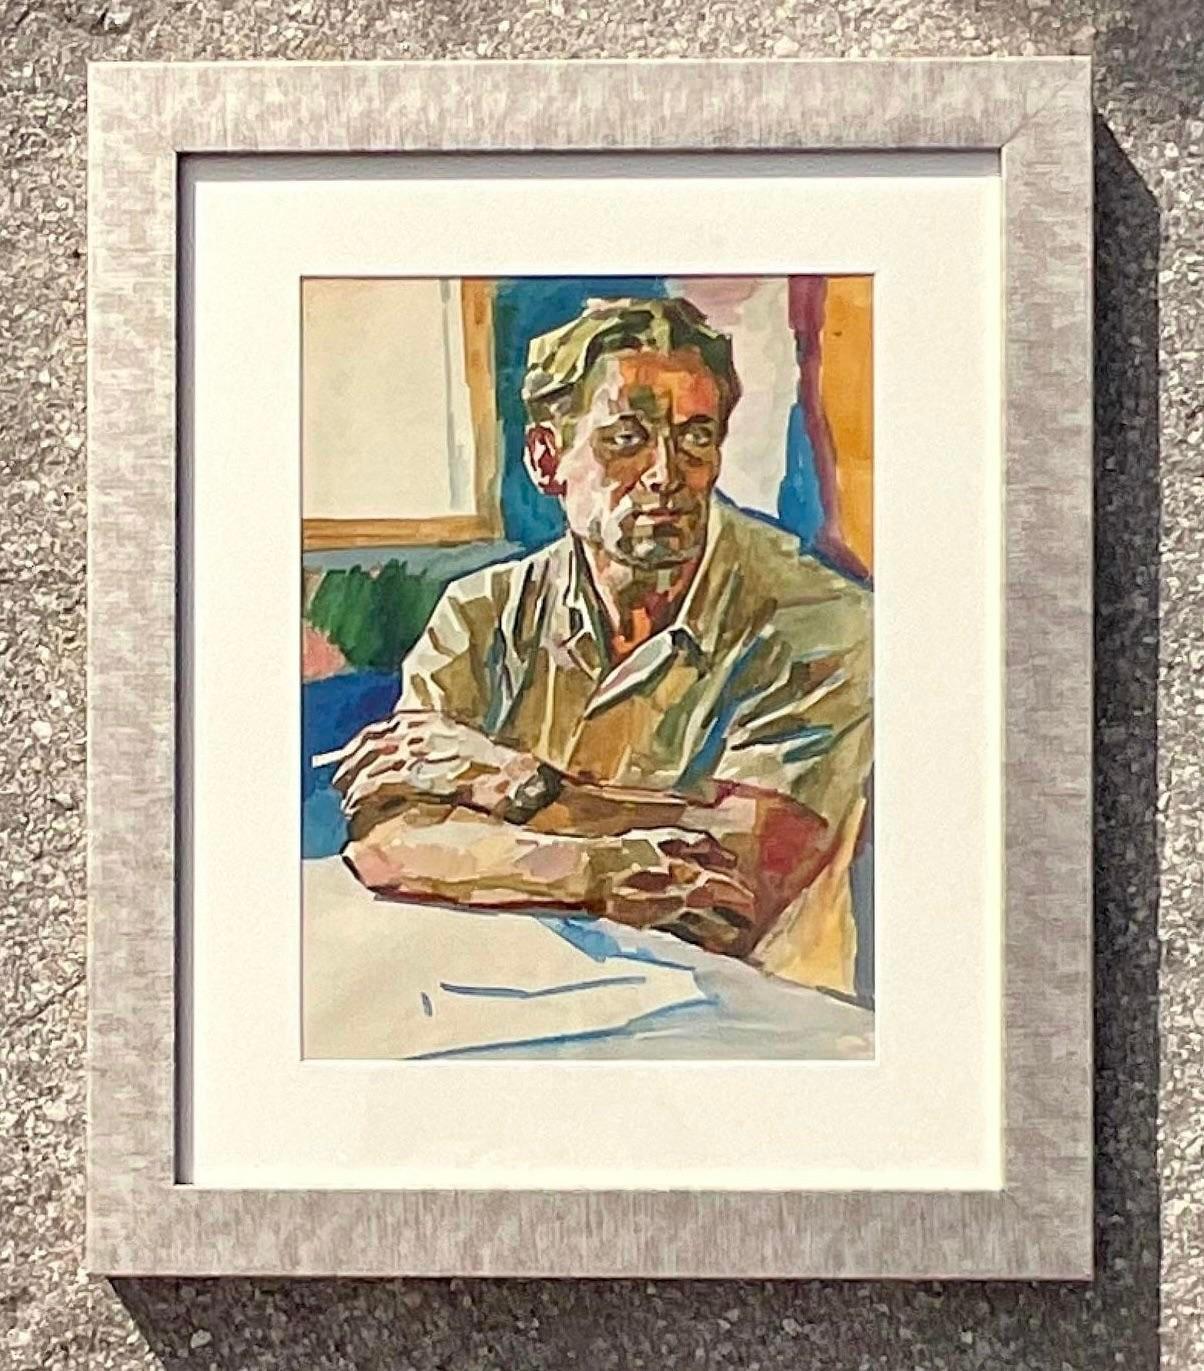 An exceptional vintage Boho Original oil portrait on paper. A chic Fauve style composition of a handsome man. Newly framed. Acquired from a Palm Beach estate.